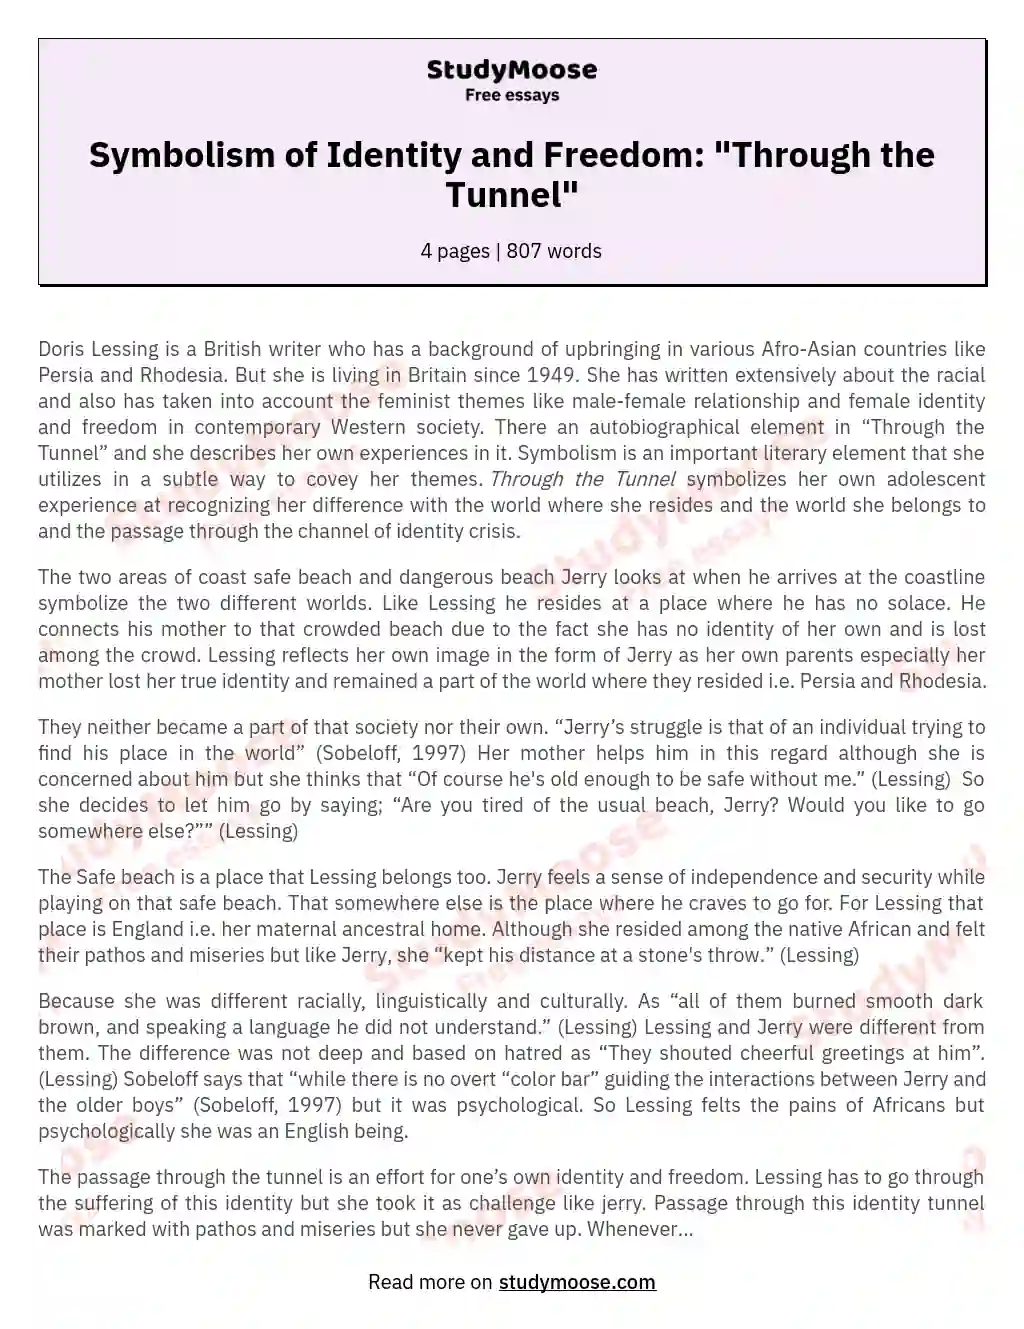 Symbolism of Identity and Freedom: "Through the Tunnel" essay